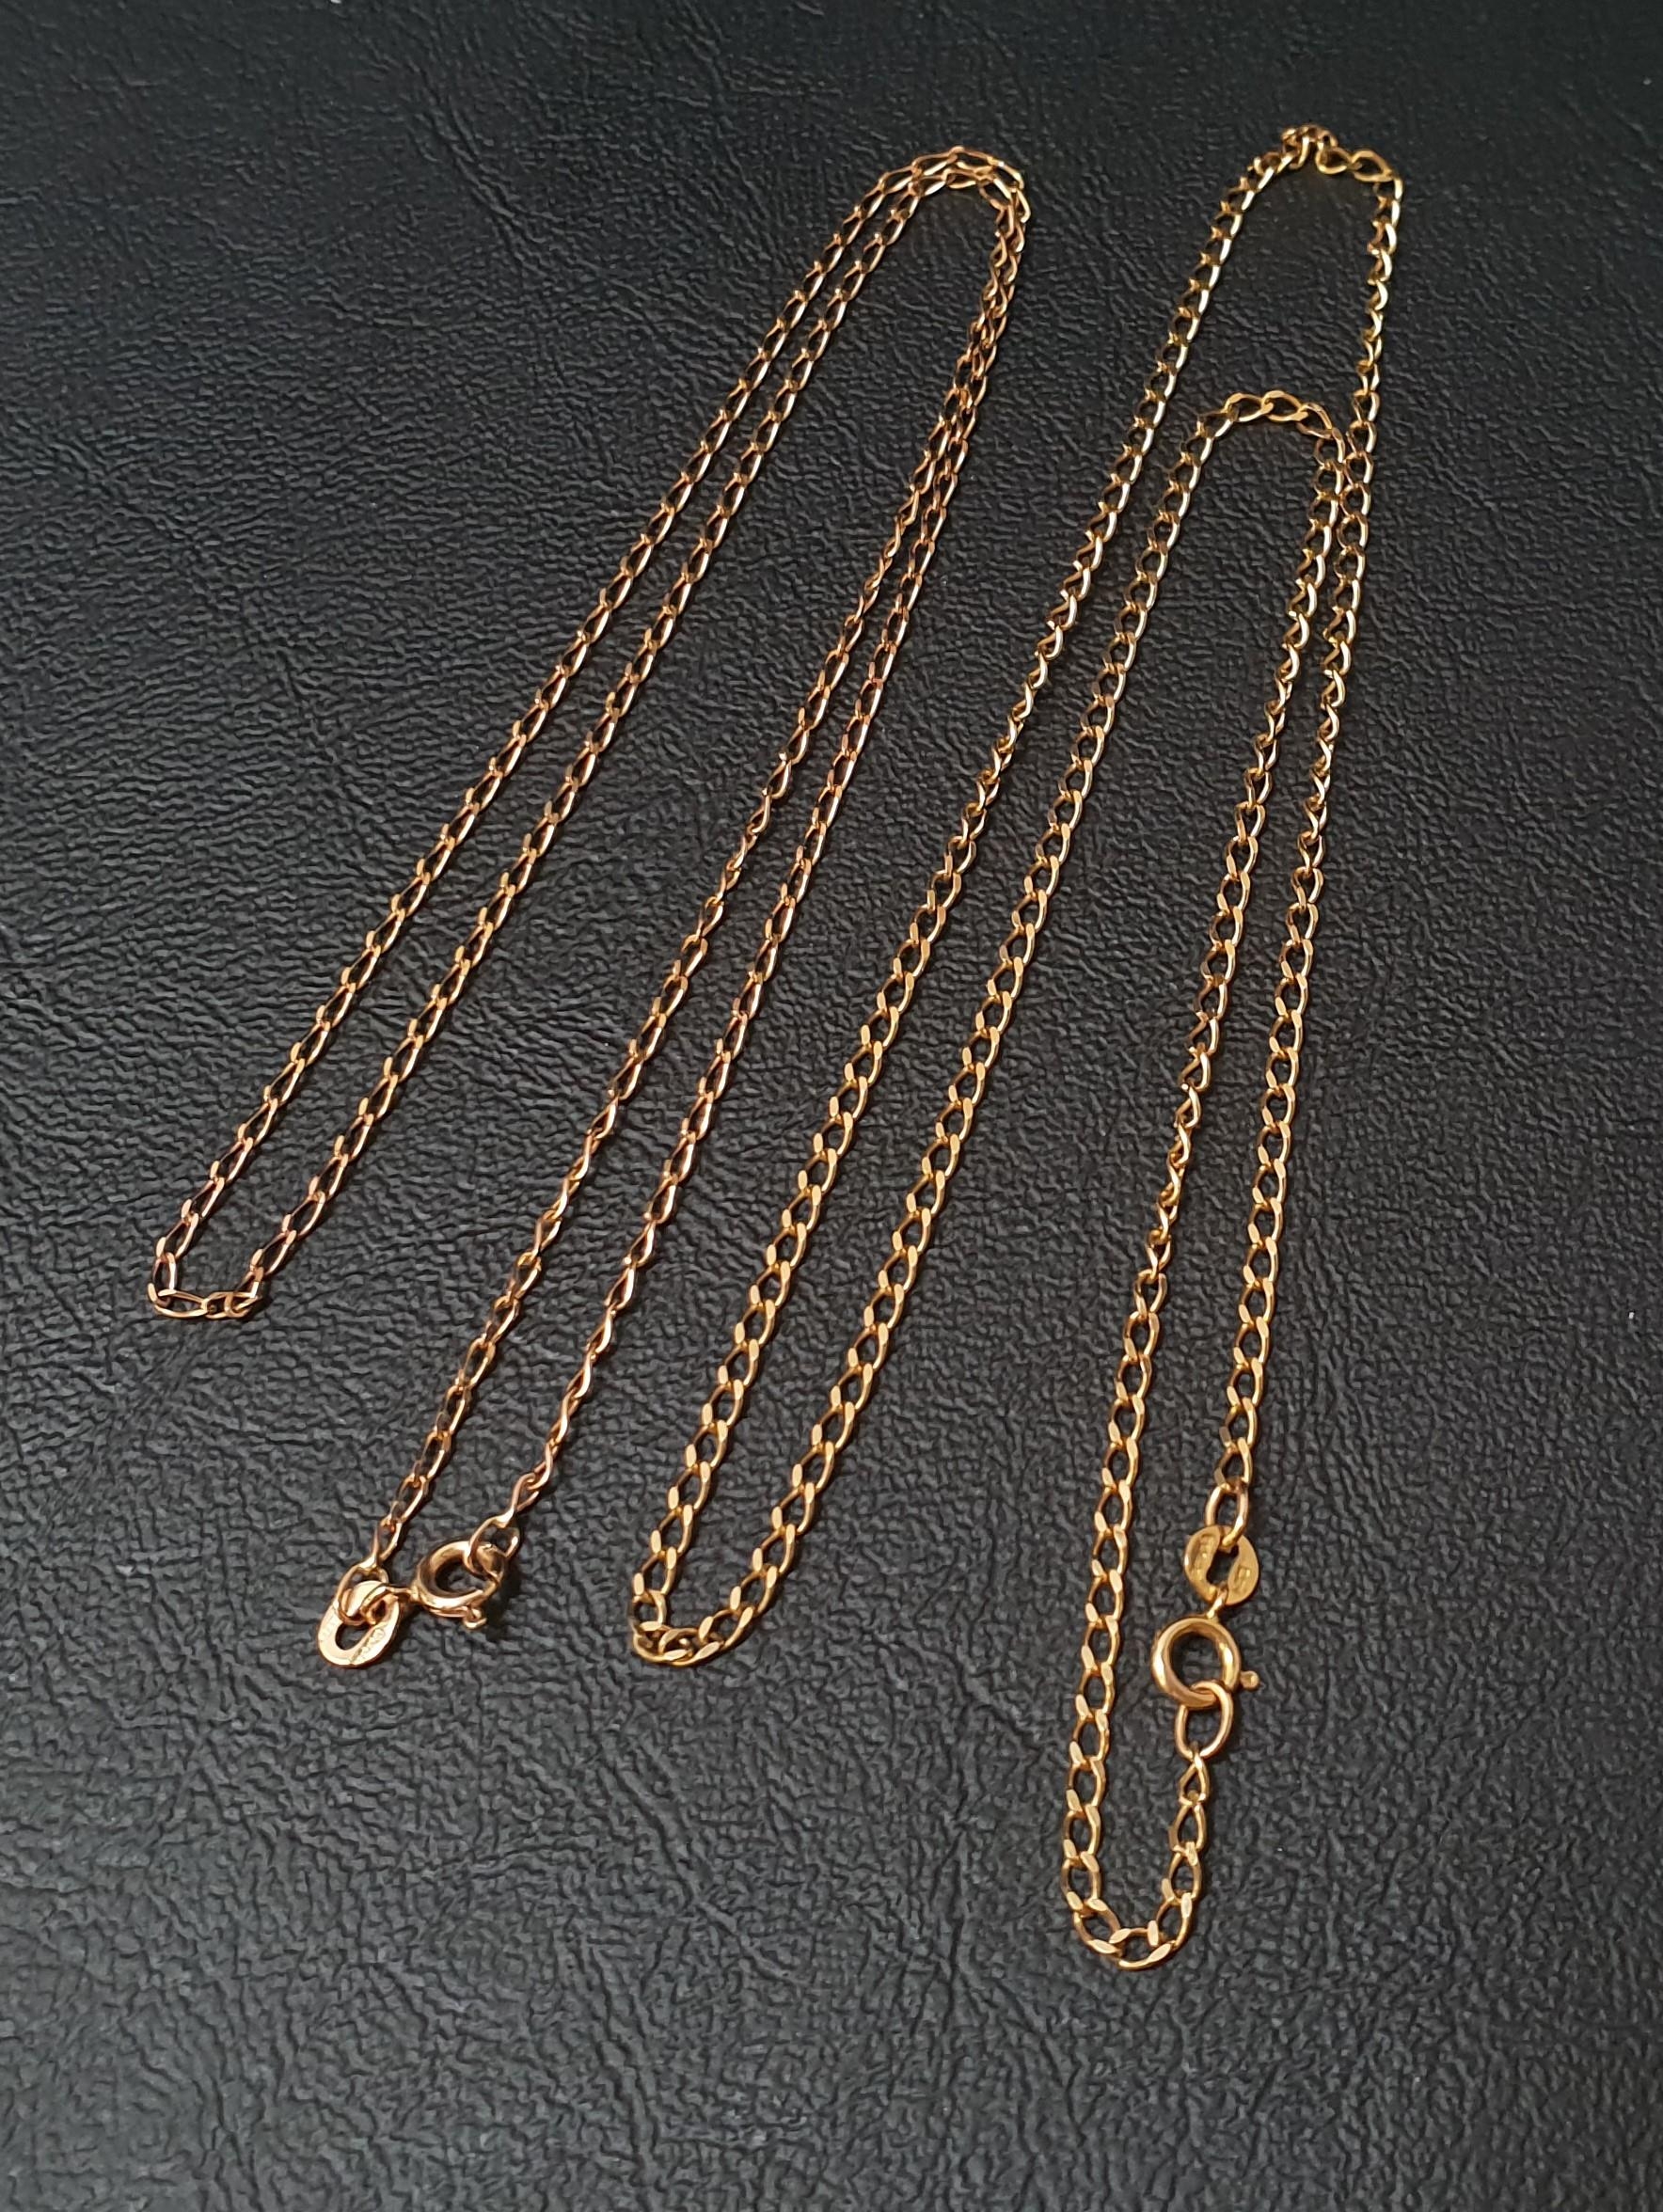 TWO NINE CARAT GOLD CURB LINK NECK CHAINS 43cm and 45.5cm long respectively, total weight